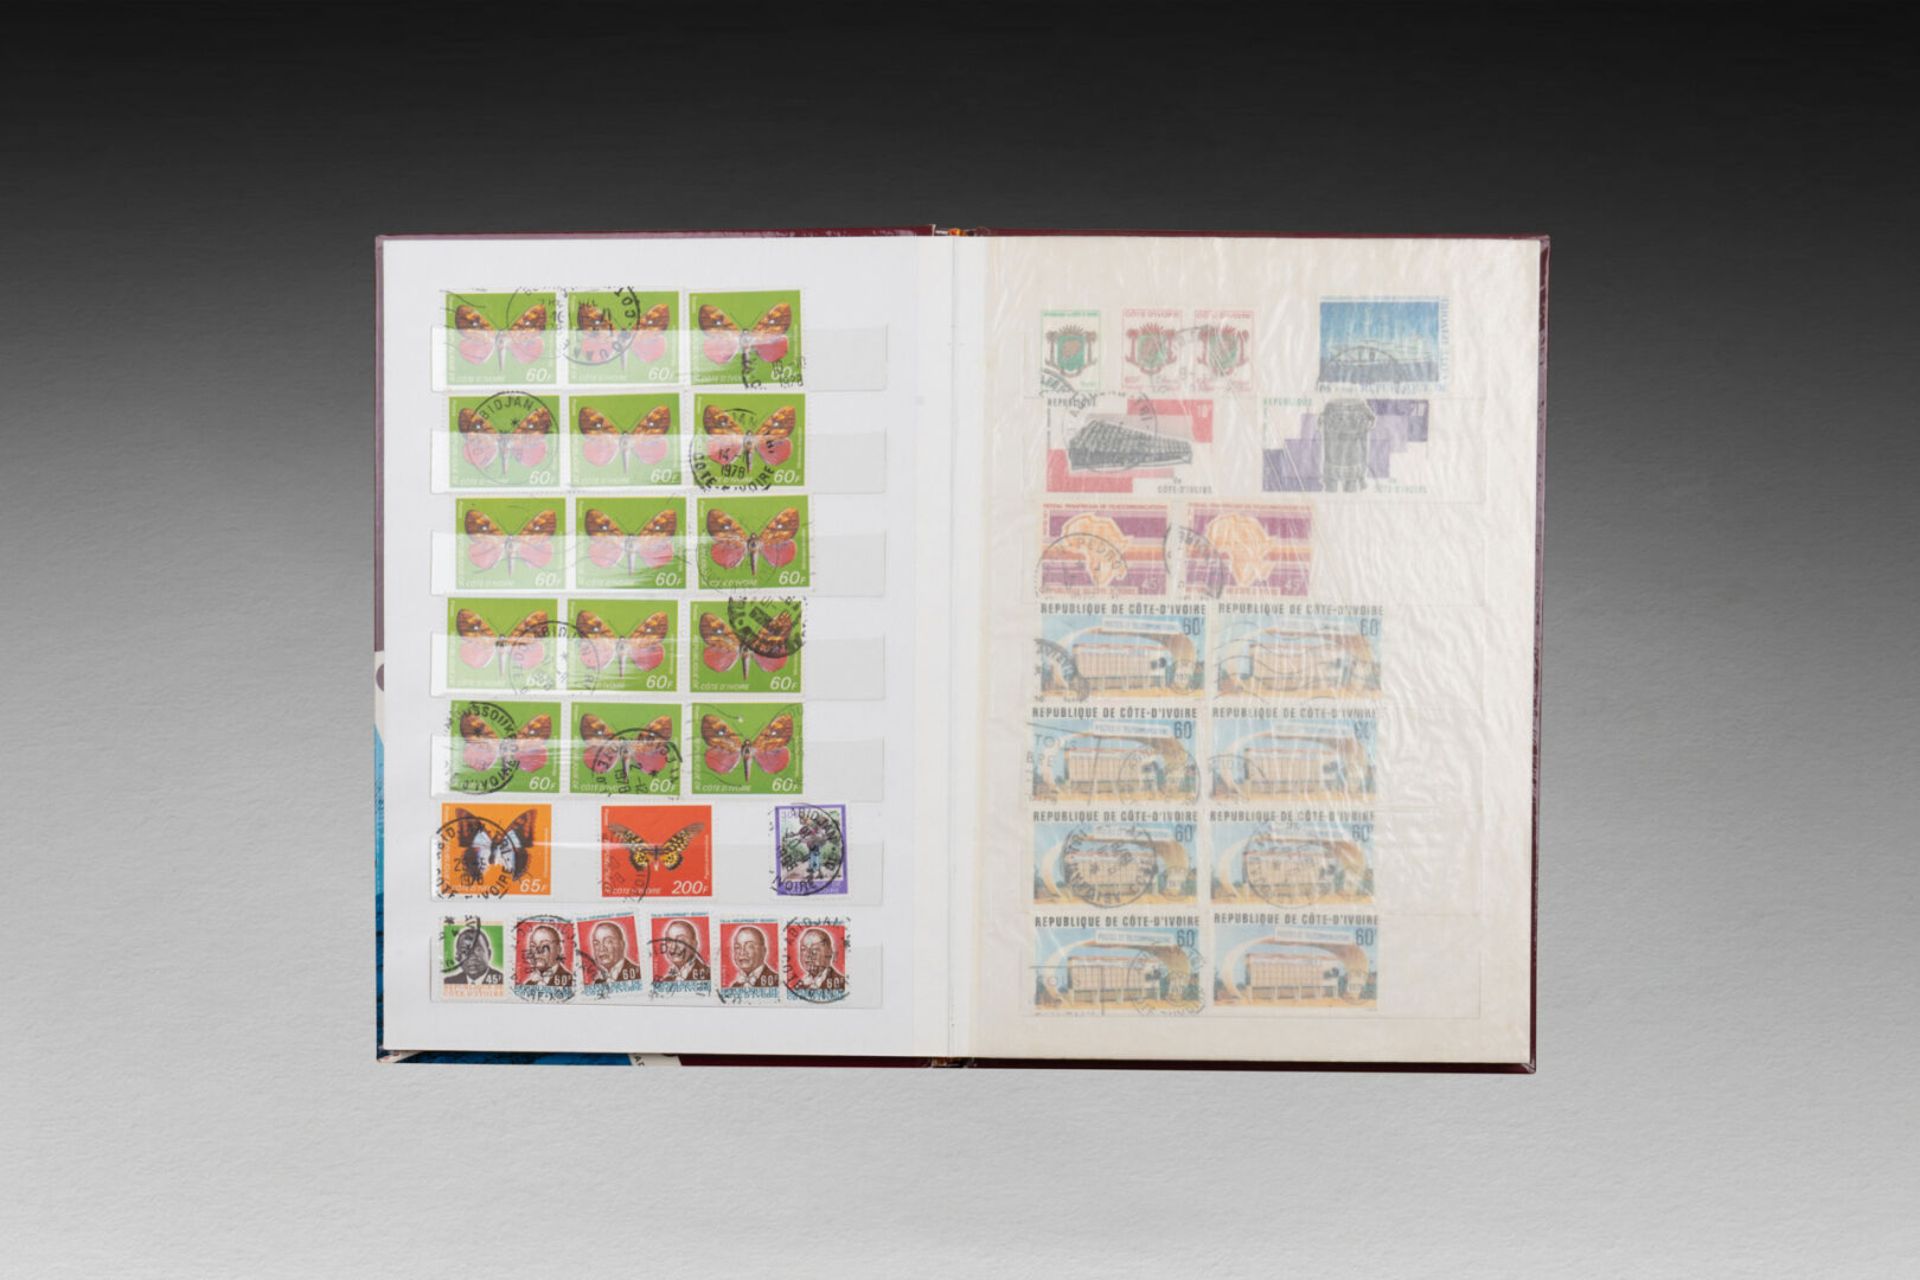 TIMBRES - Image 33 of 57